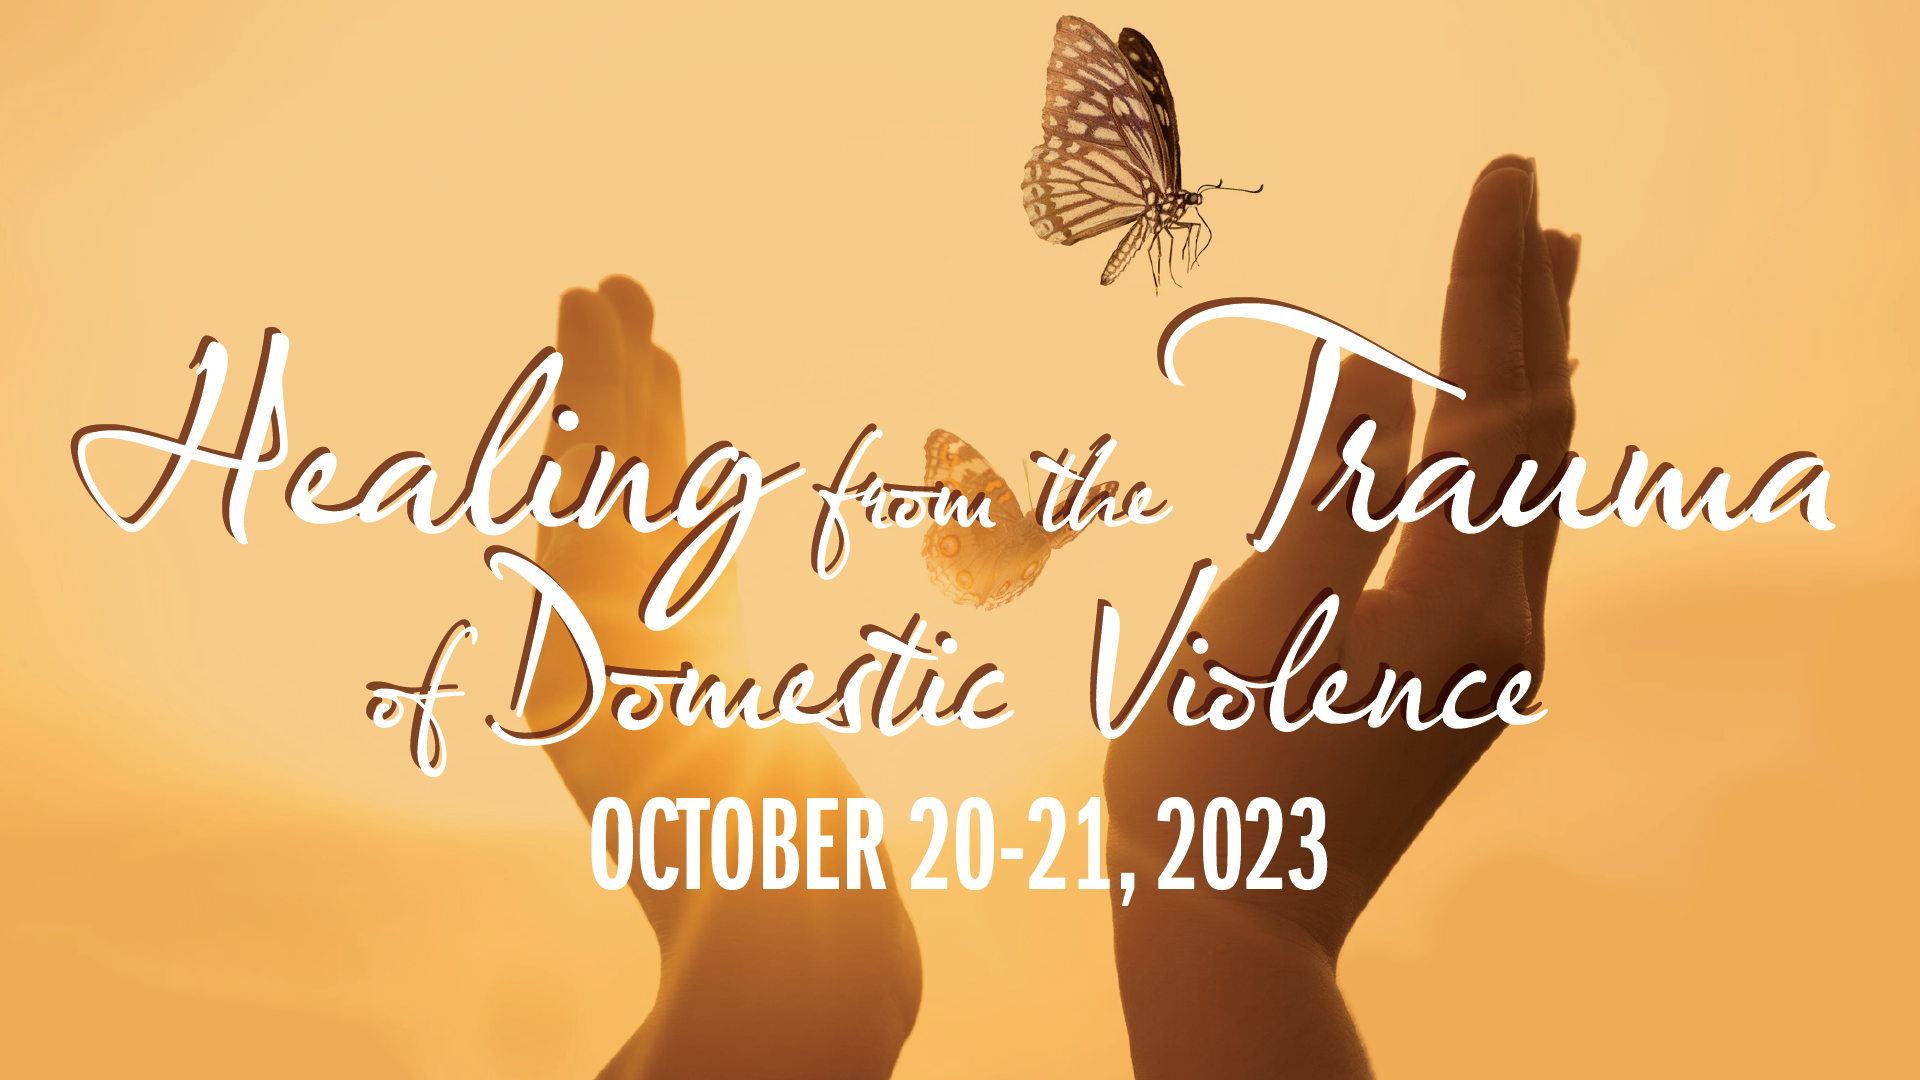 Featured image for “EPA seminar to explore ‘Healing from the Trauma of Domestic Violence’”